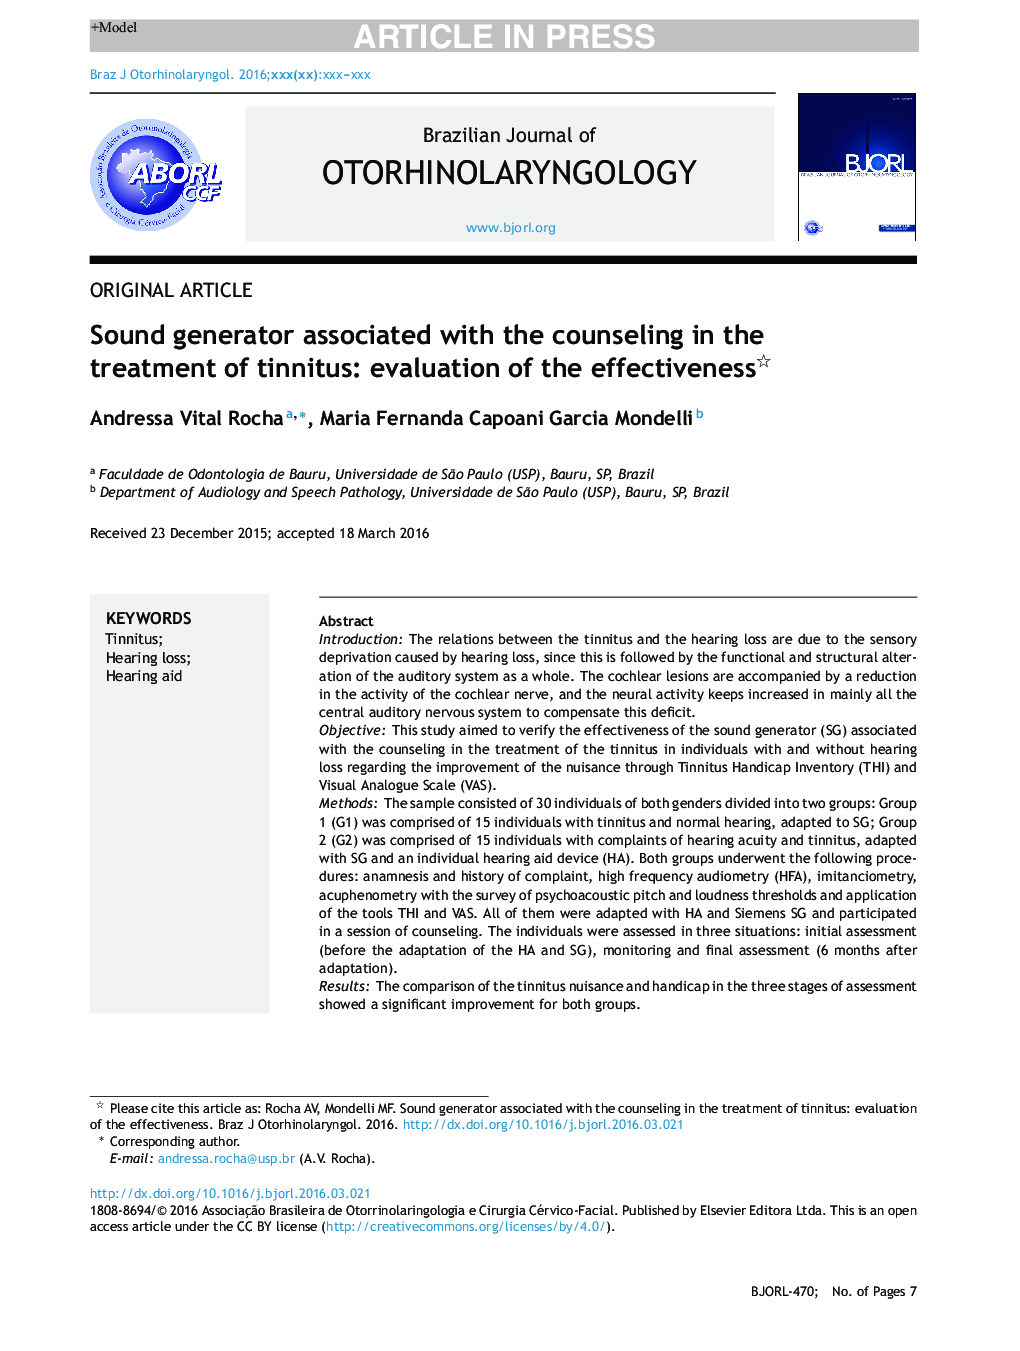 Sound generator associated with the counseling in the treatment of tinnitus: evaluation of the effectiveness